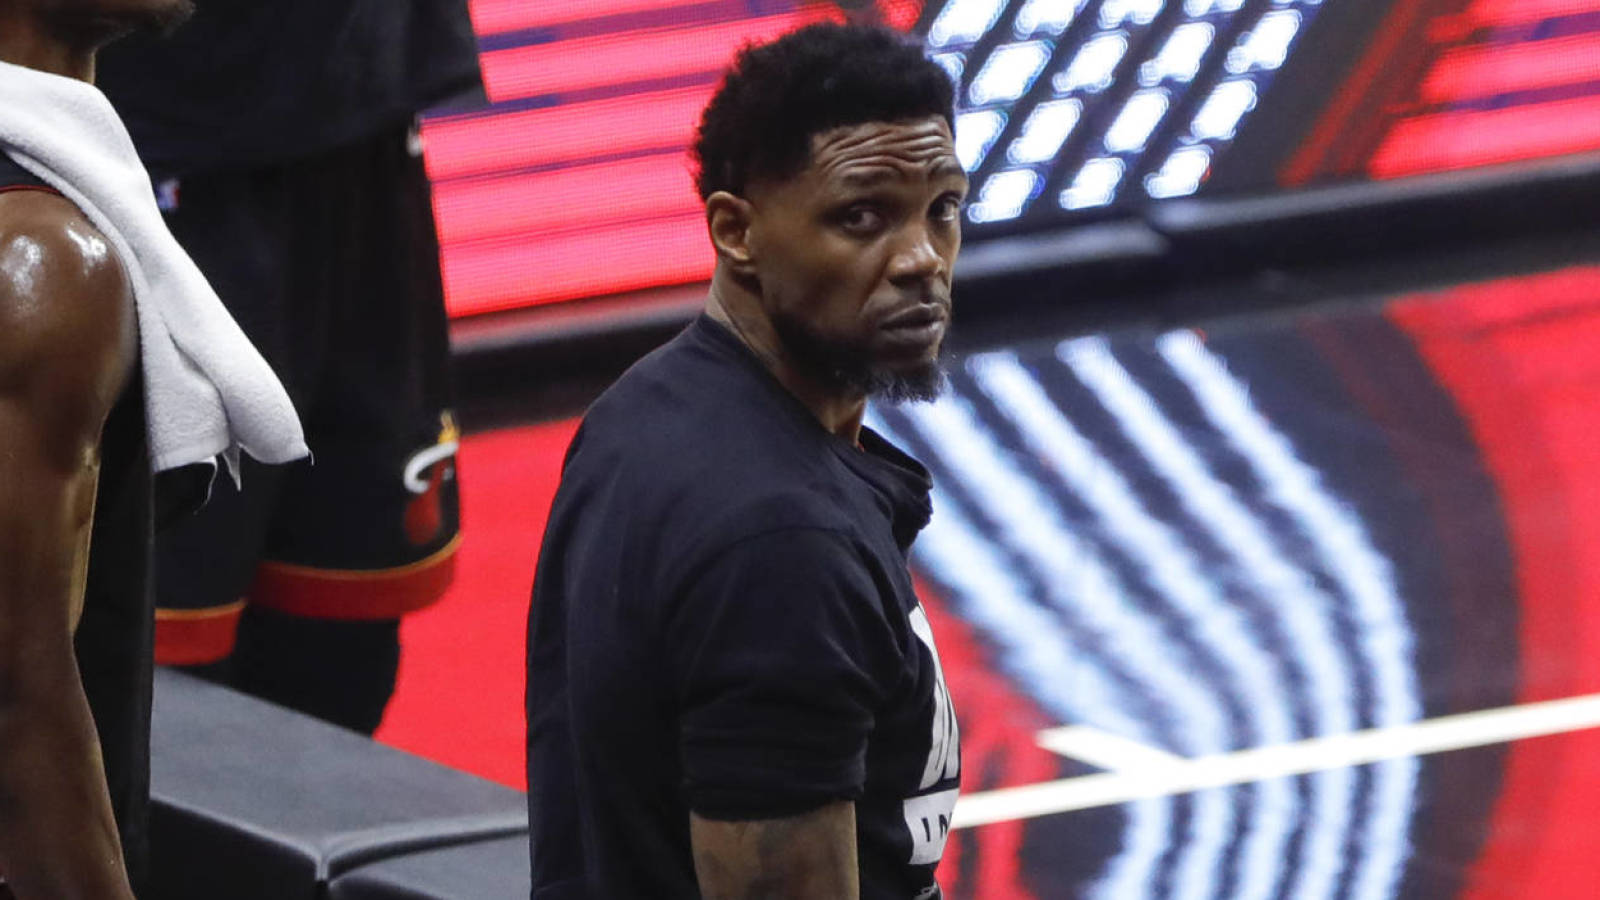 Udonis Haslem returning to Heat for 19th season